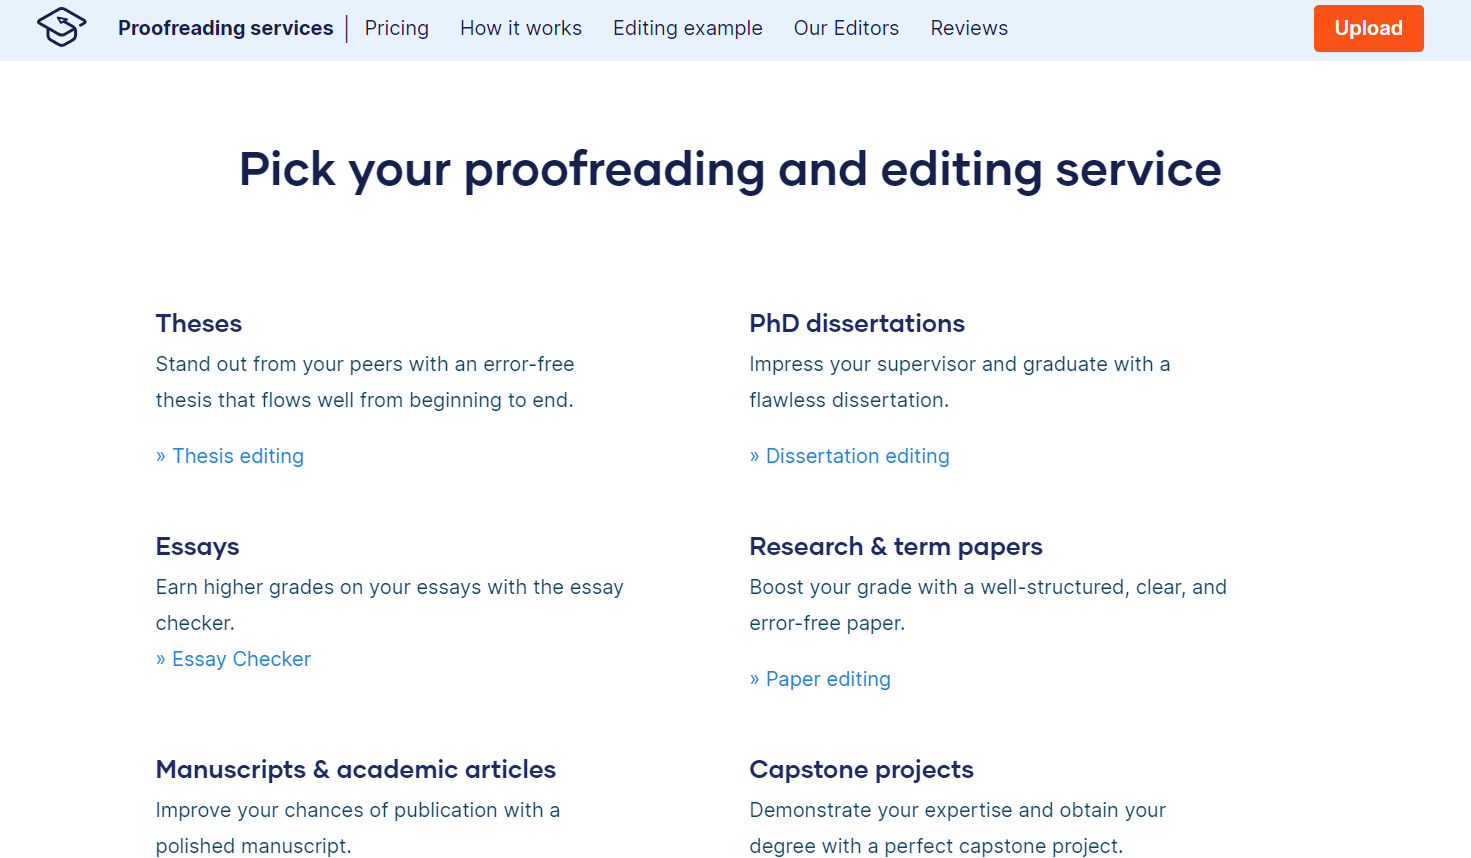 Professional Editing & Proofreading Services feature of Scribbr